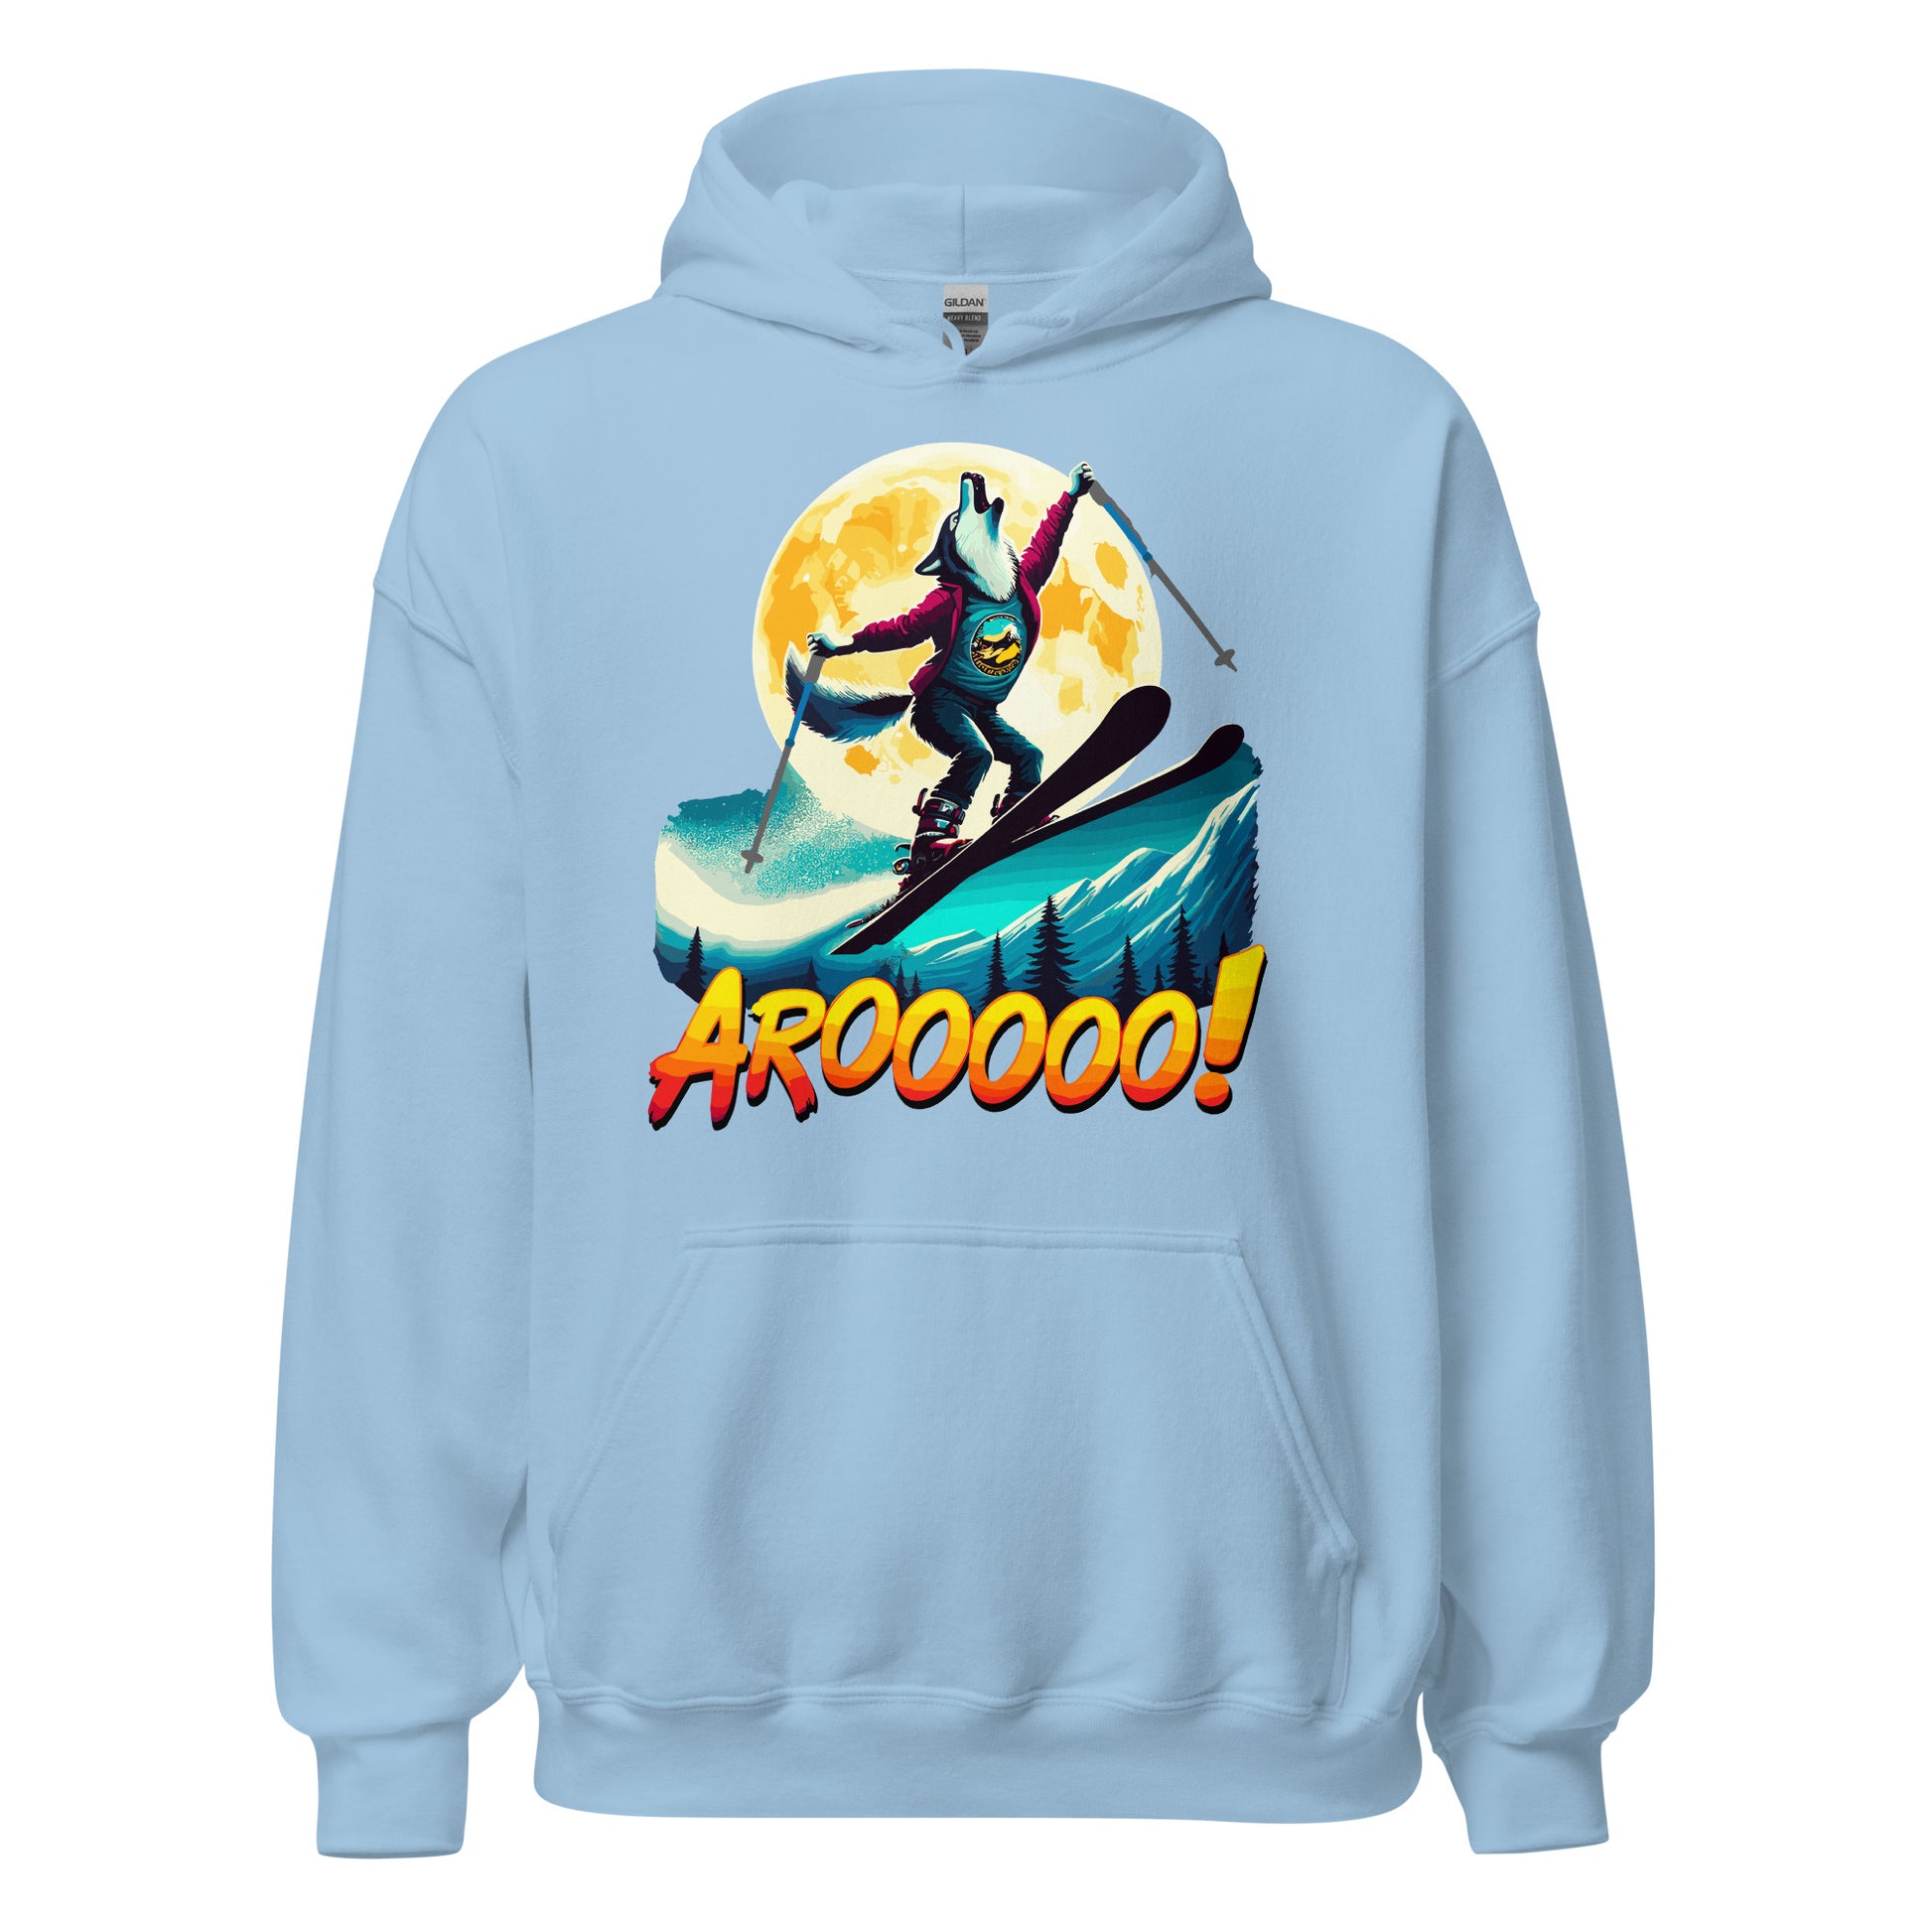 AROOOO! Wolf ski jumping in front of a full moon printed on a hoodie by Whistler Shirts